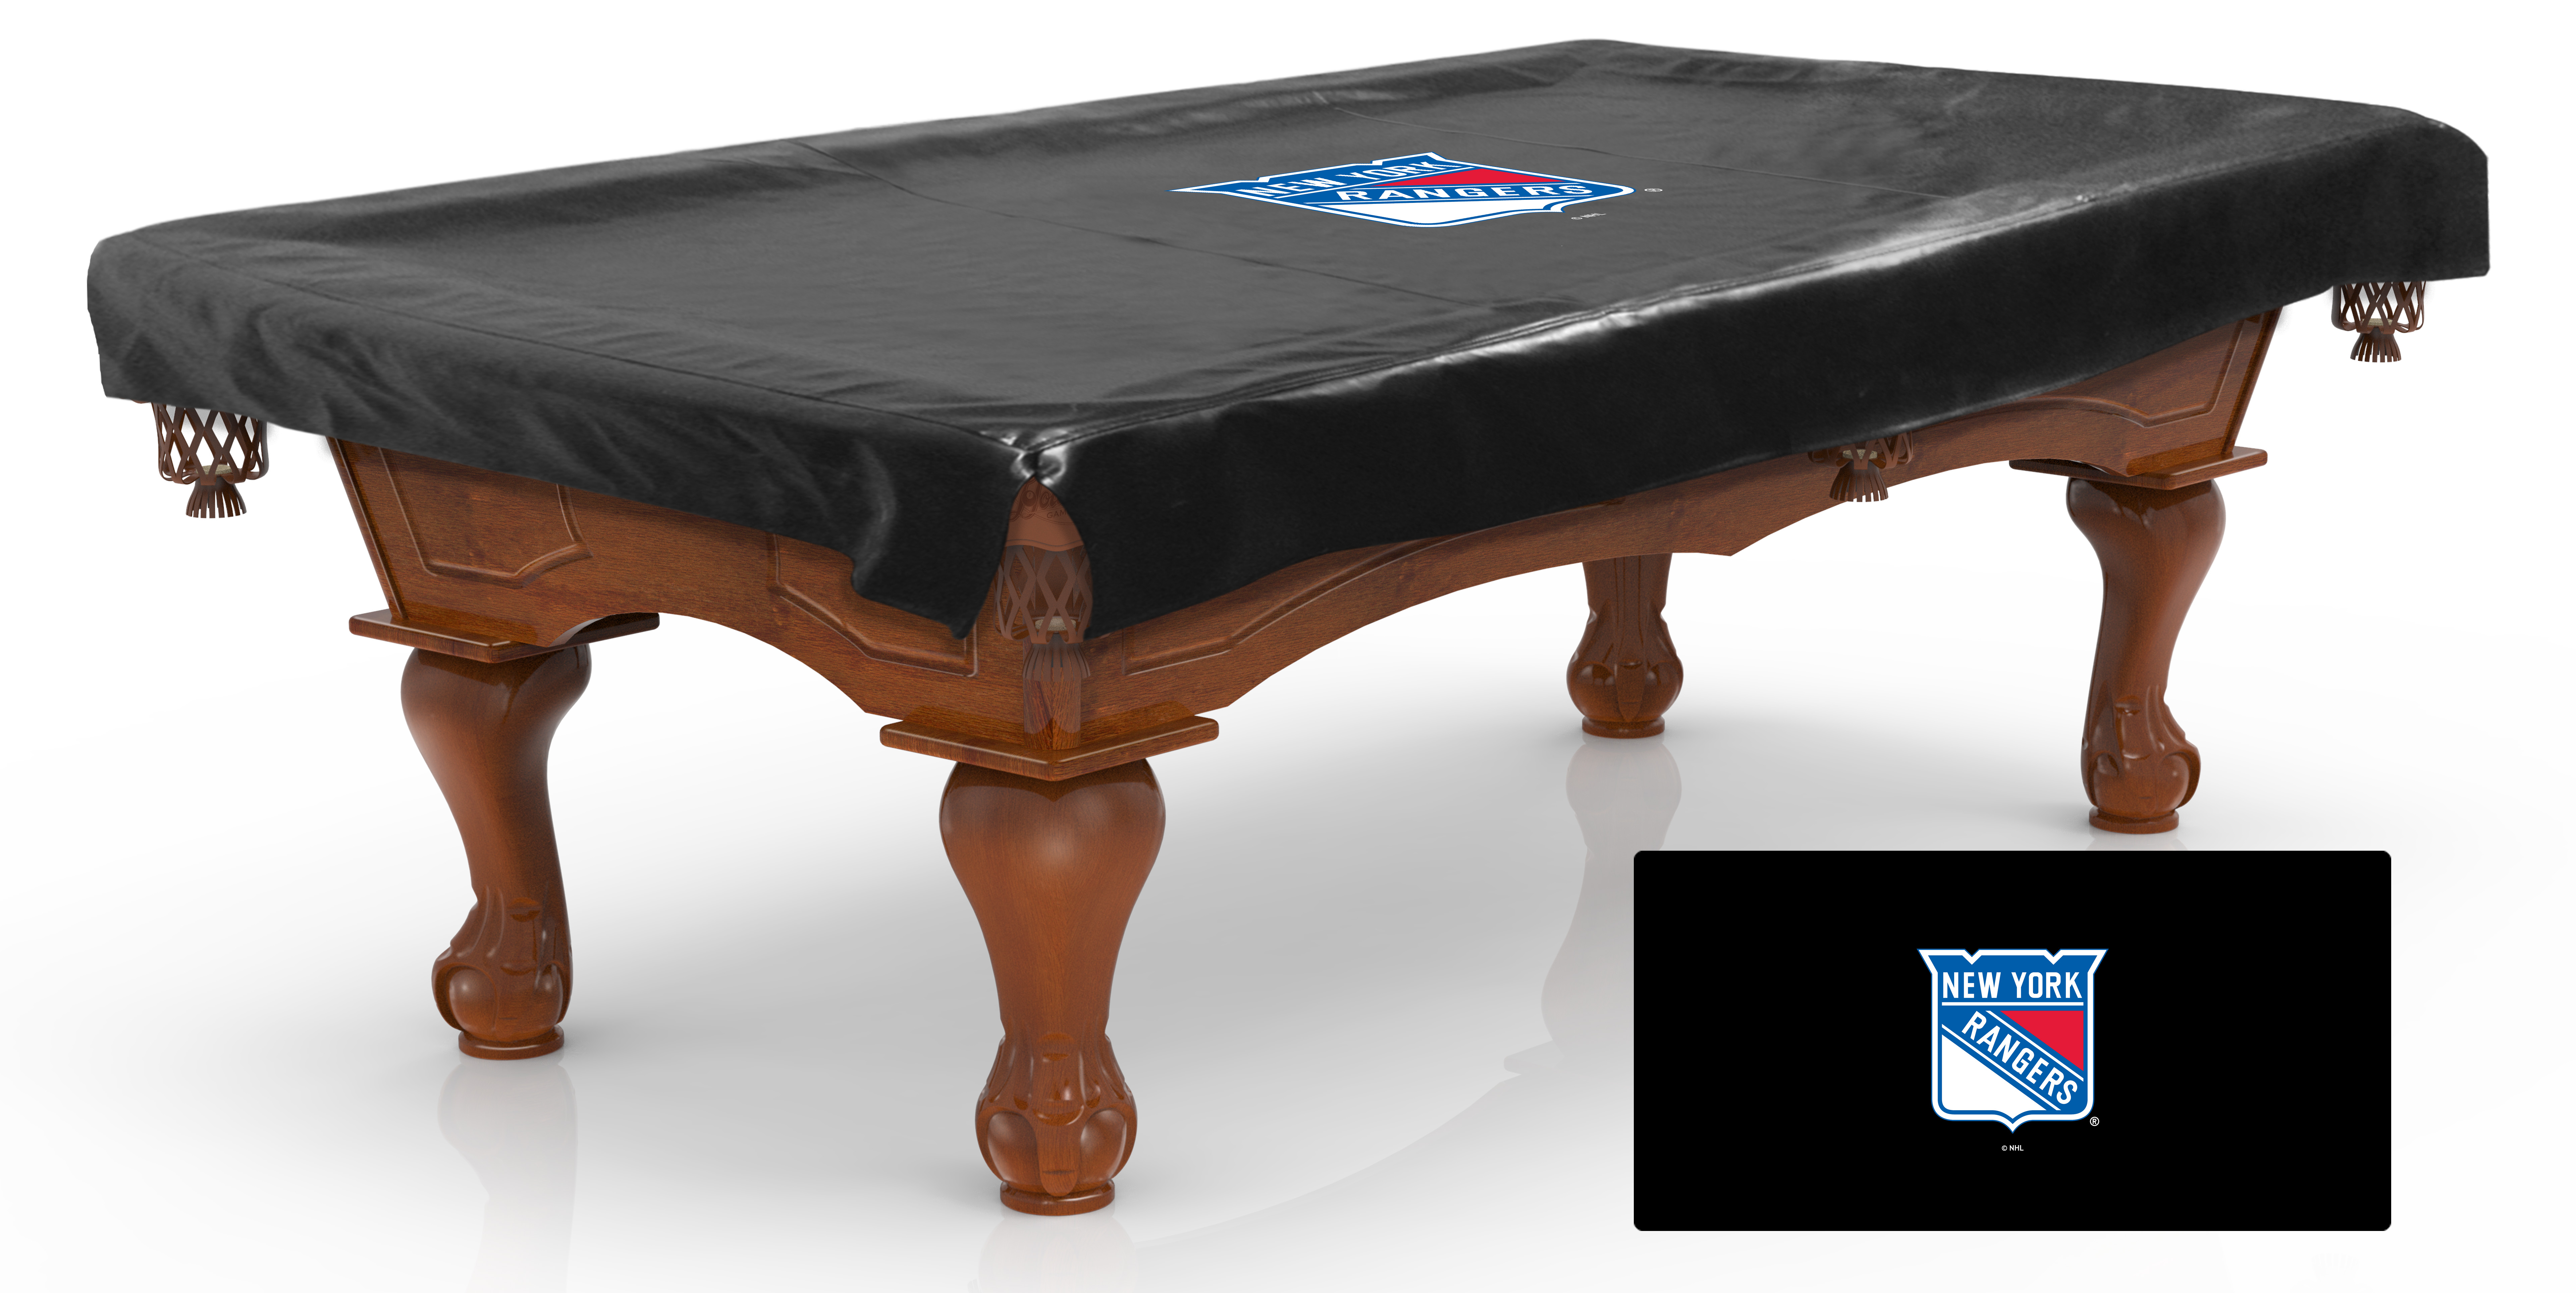 Picture of Holland Bar Stool BCV9NYRang New York Rangers Billiard Table Cover